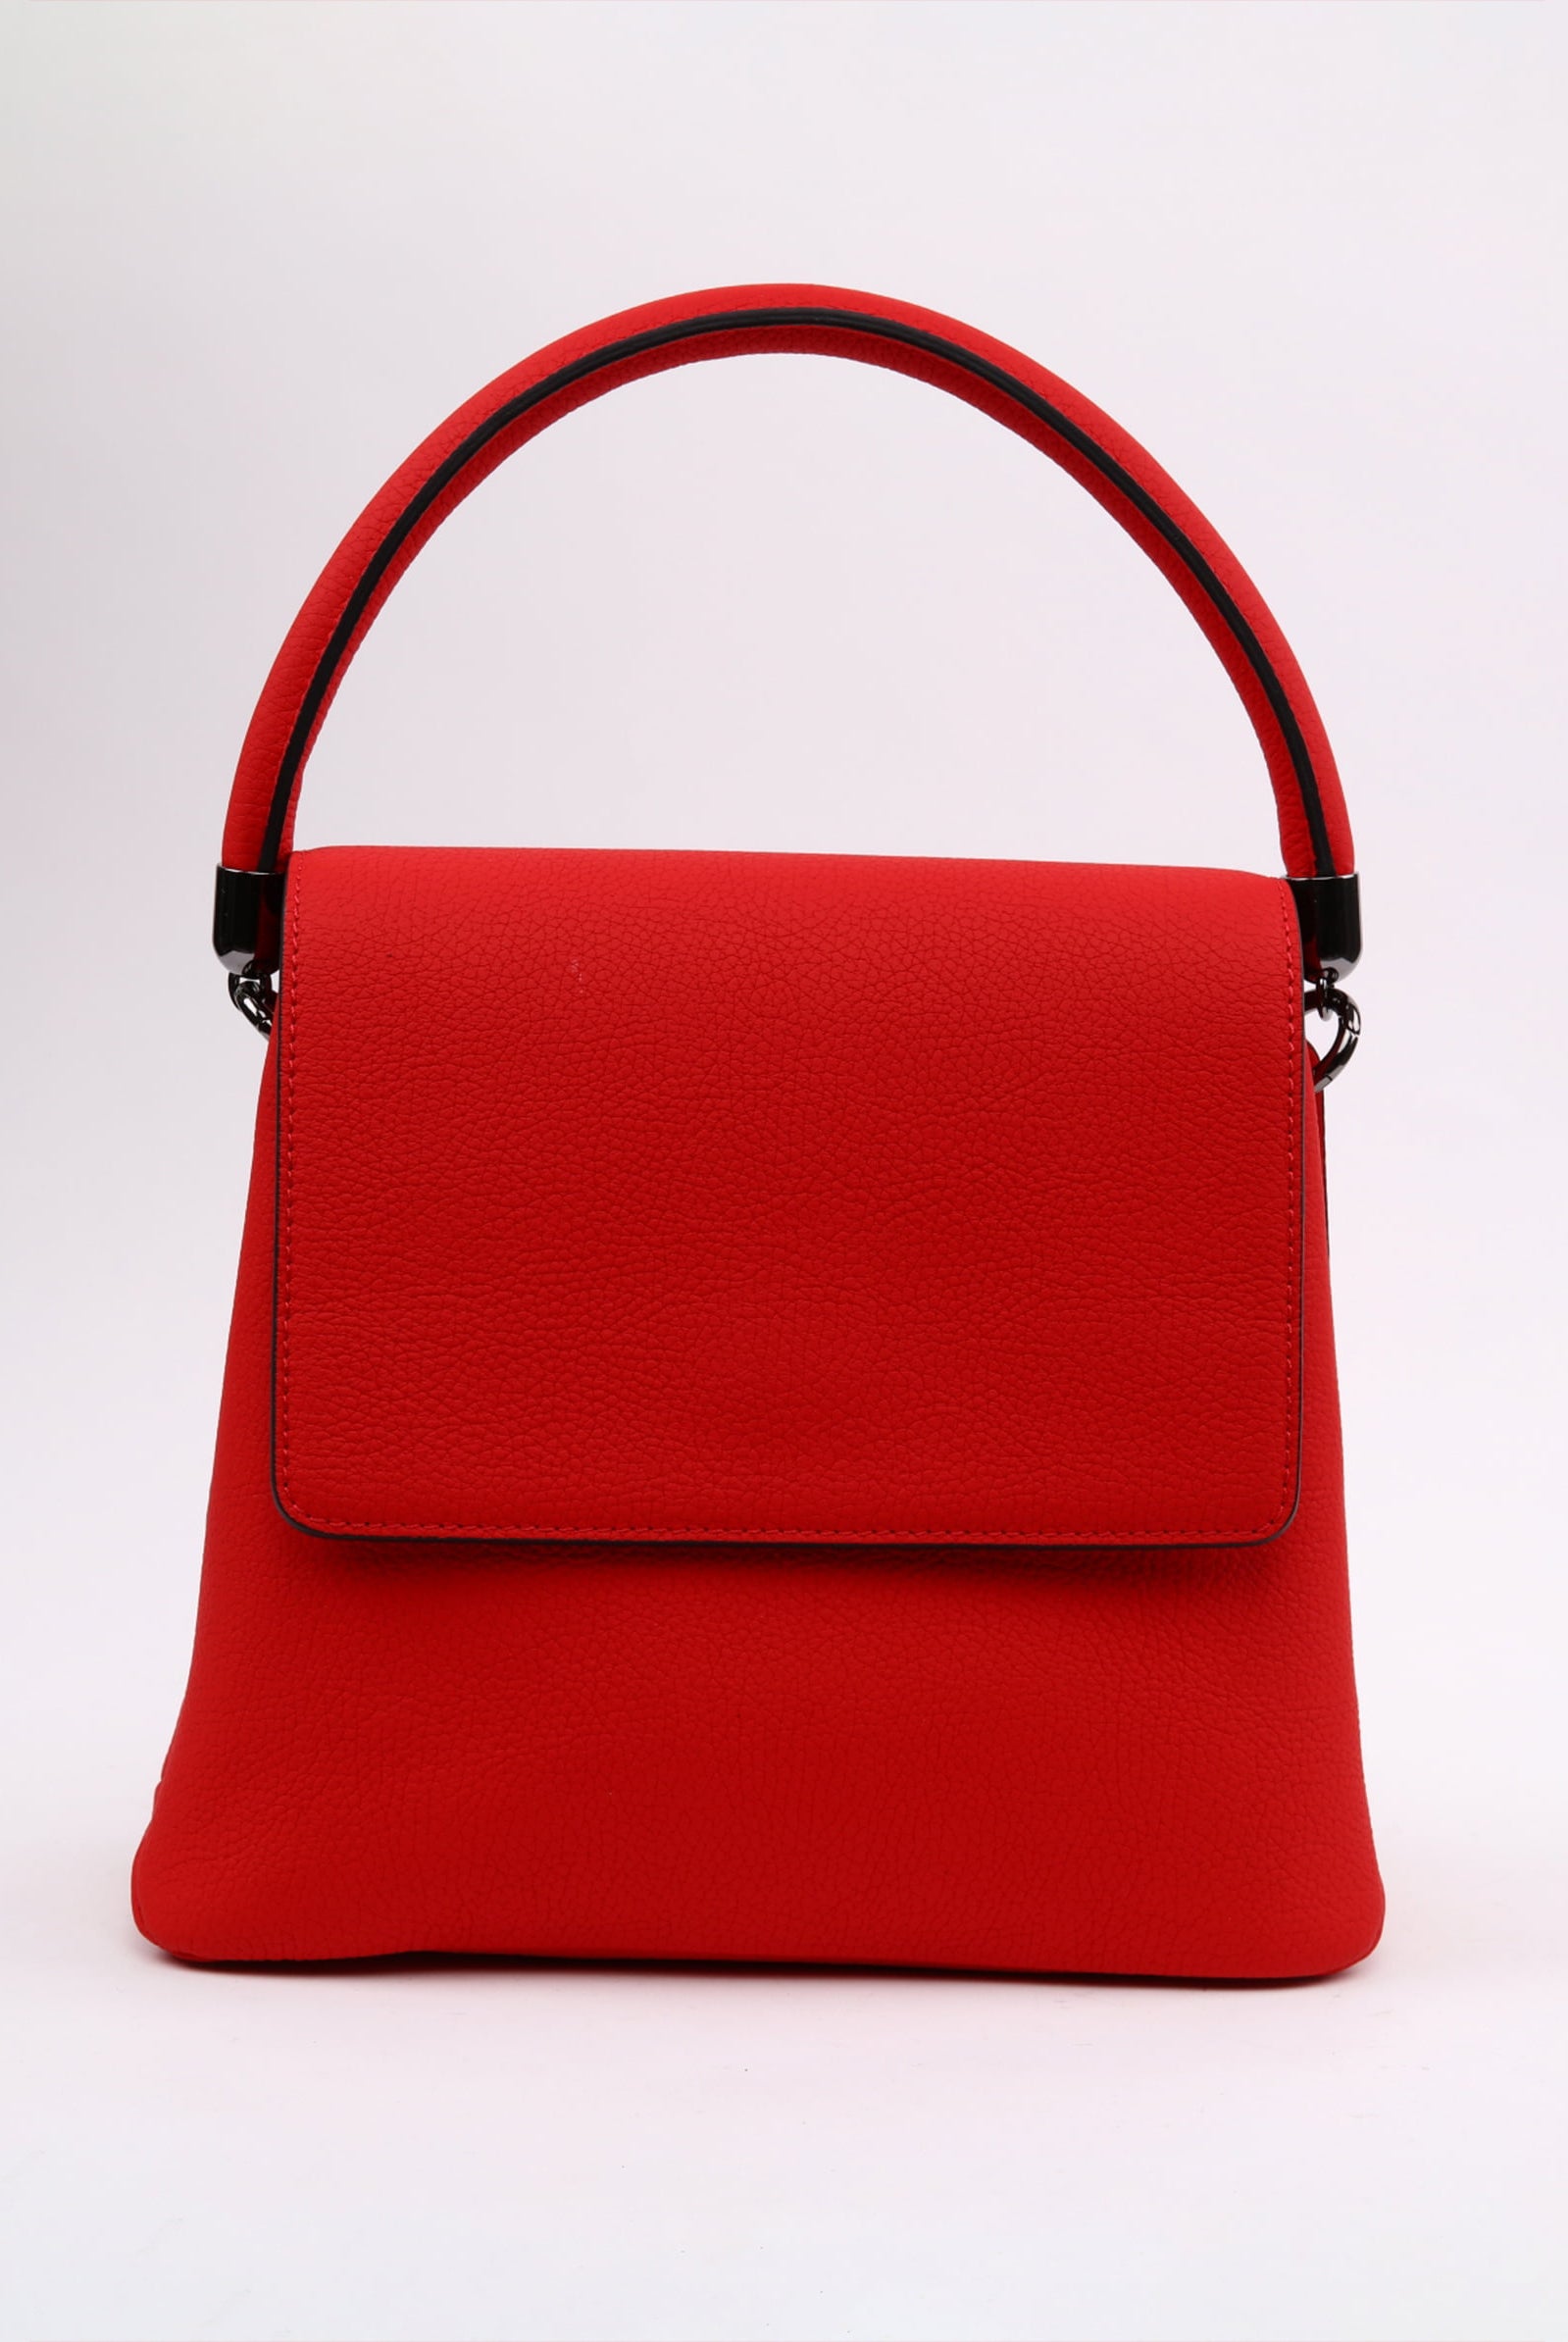 red leather hand bag uk